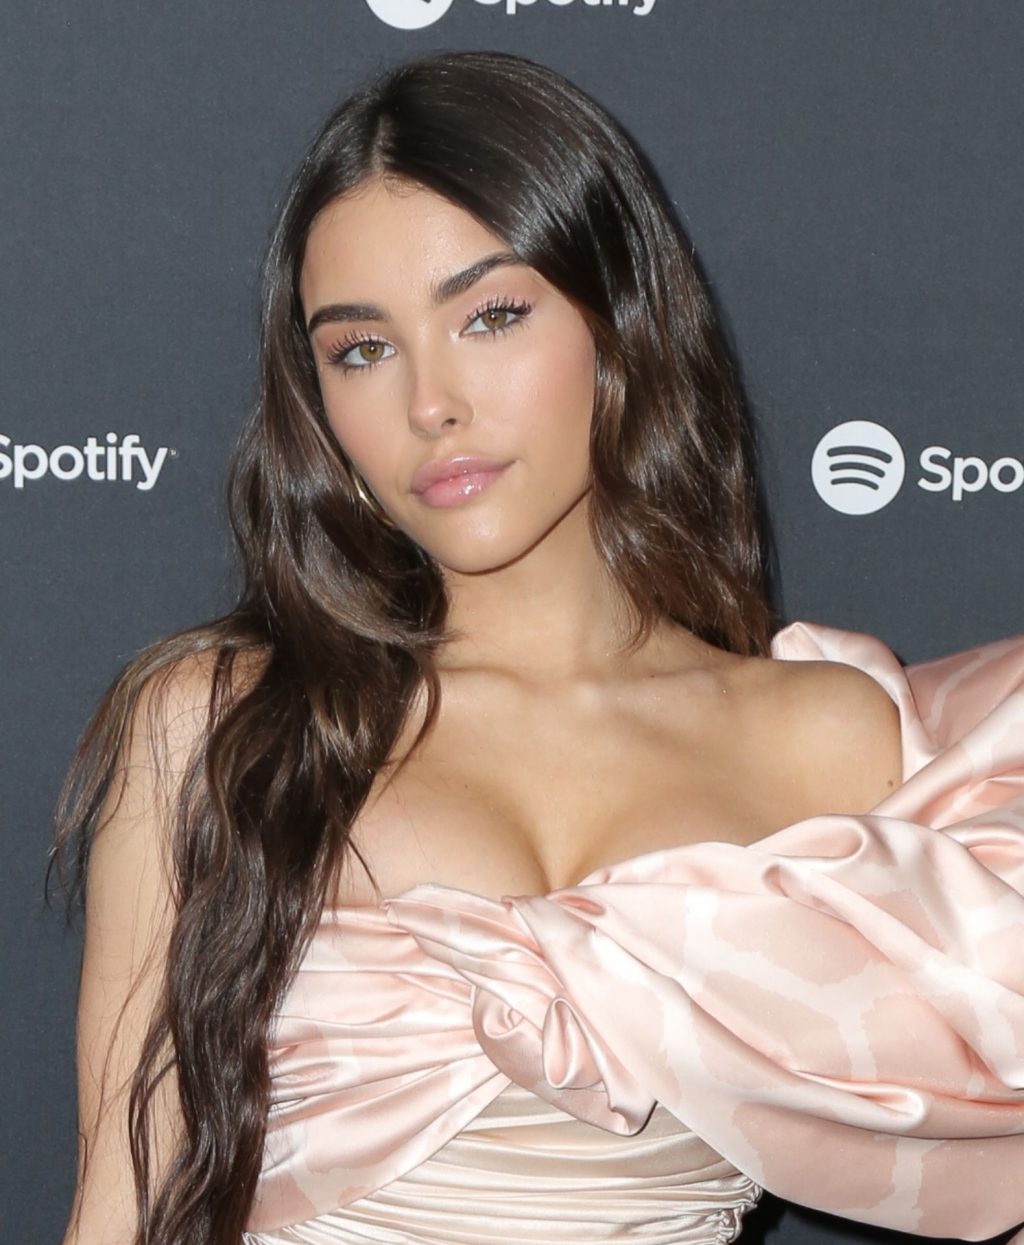 Madison Beer Displays Her Boobs at the Spotify Best New Artist Party (65 Photos)